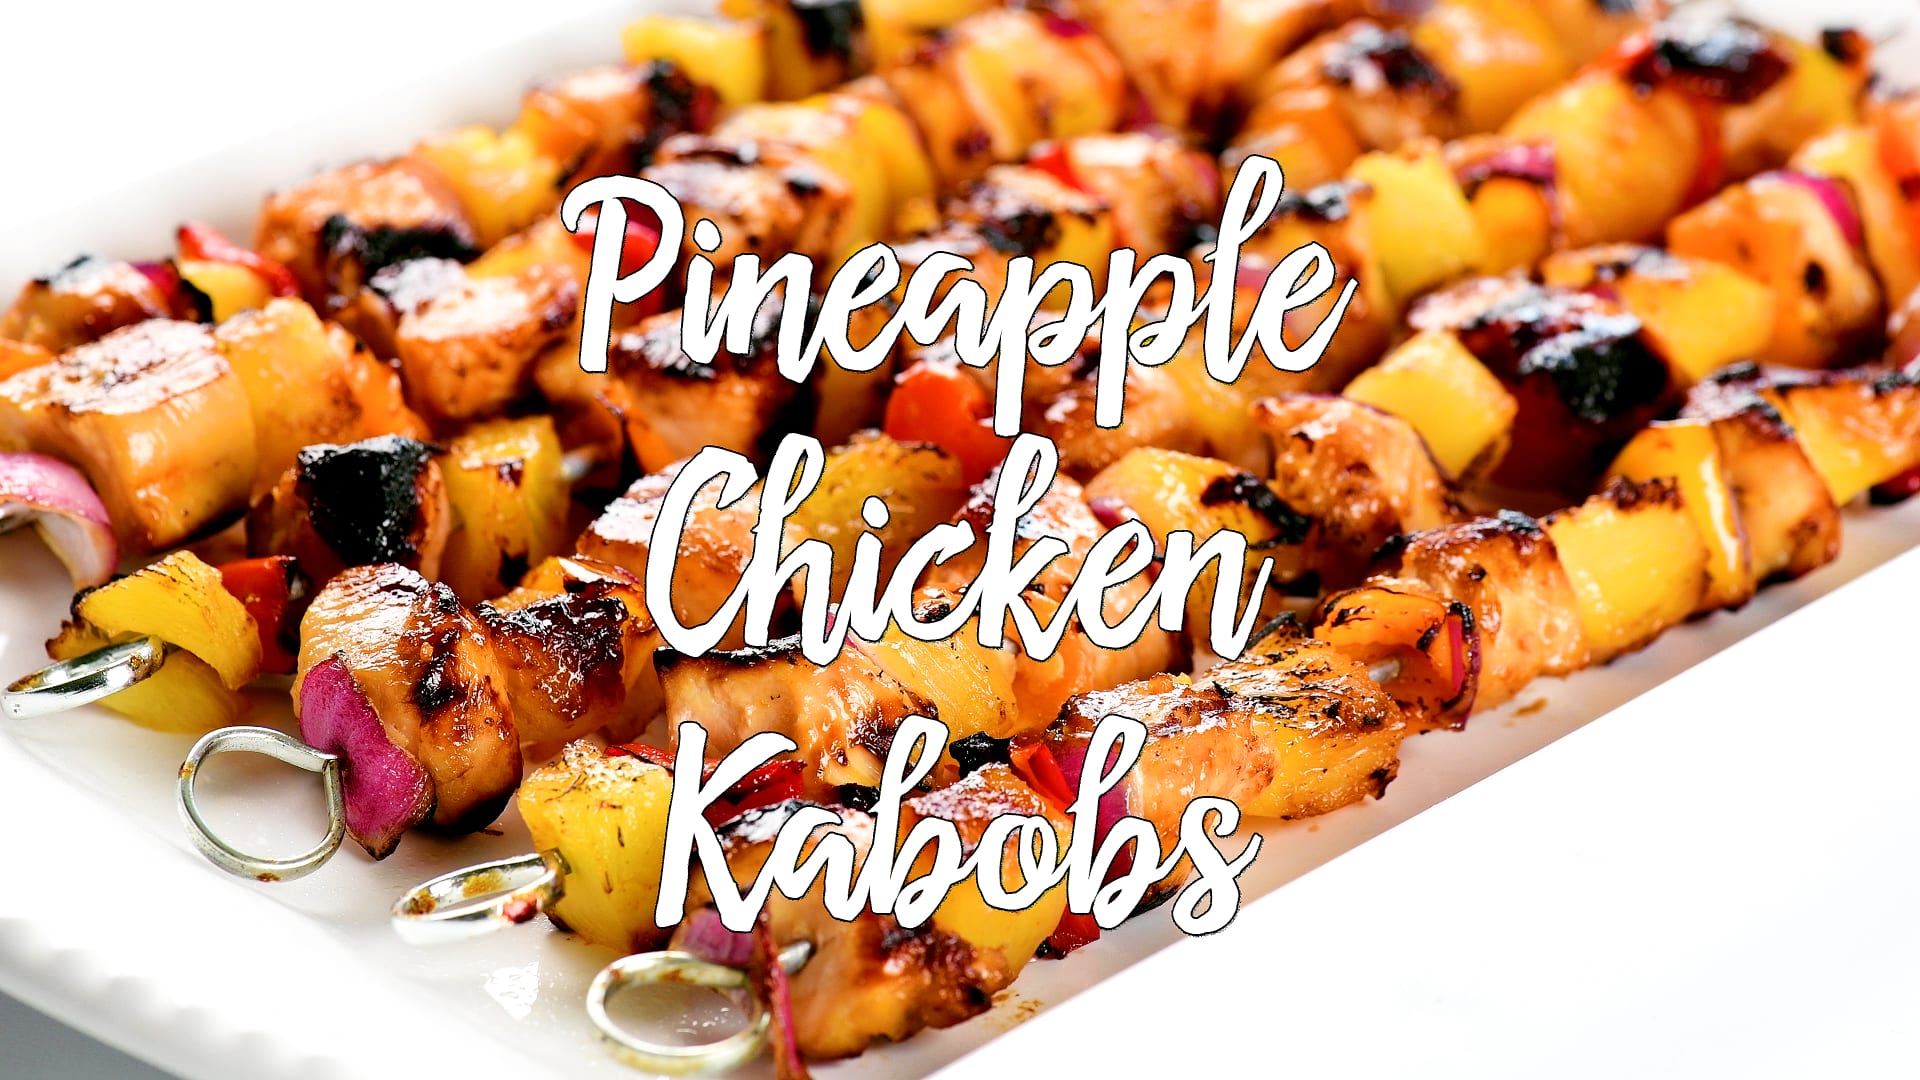 Cilantro-Lime Pineapple Chicken Skewers - Recipe from Price Chopper